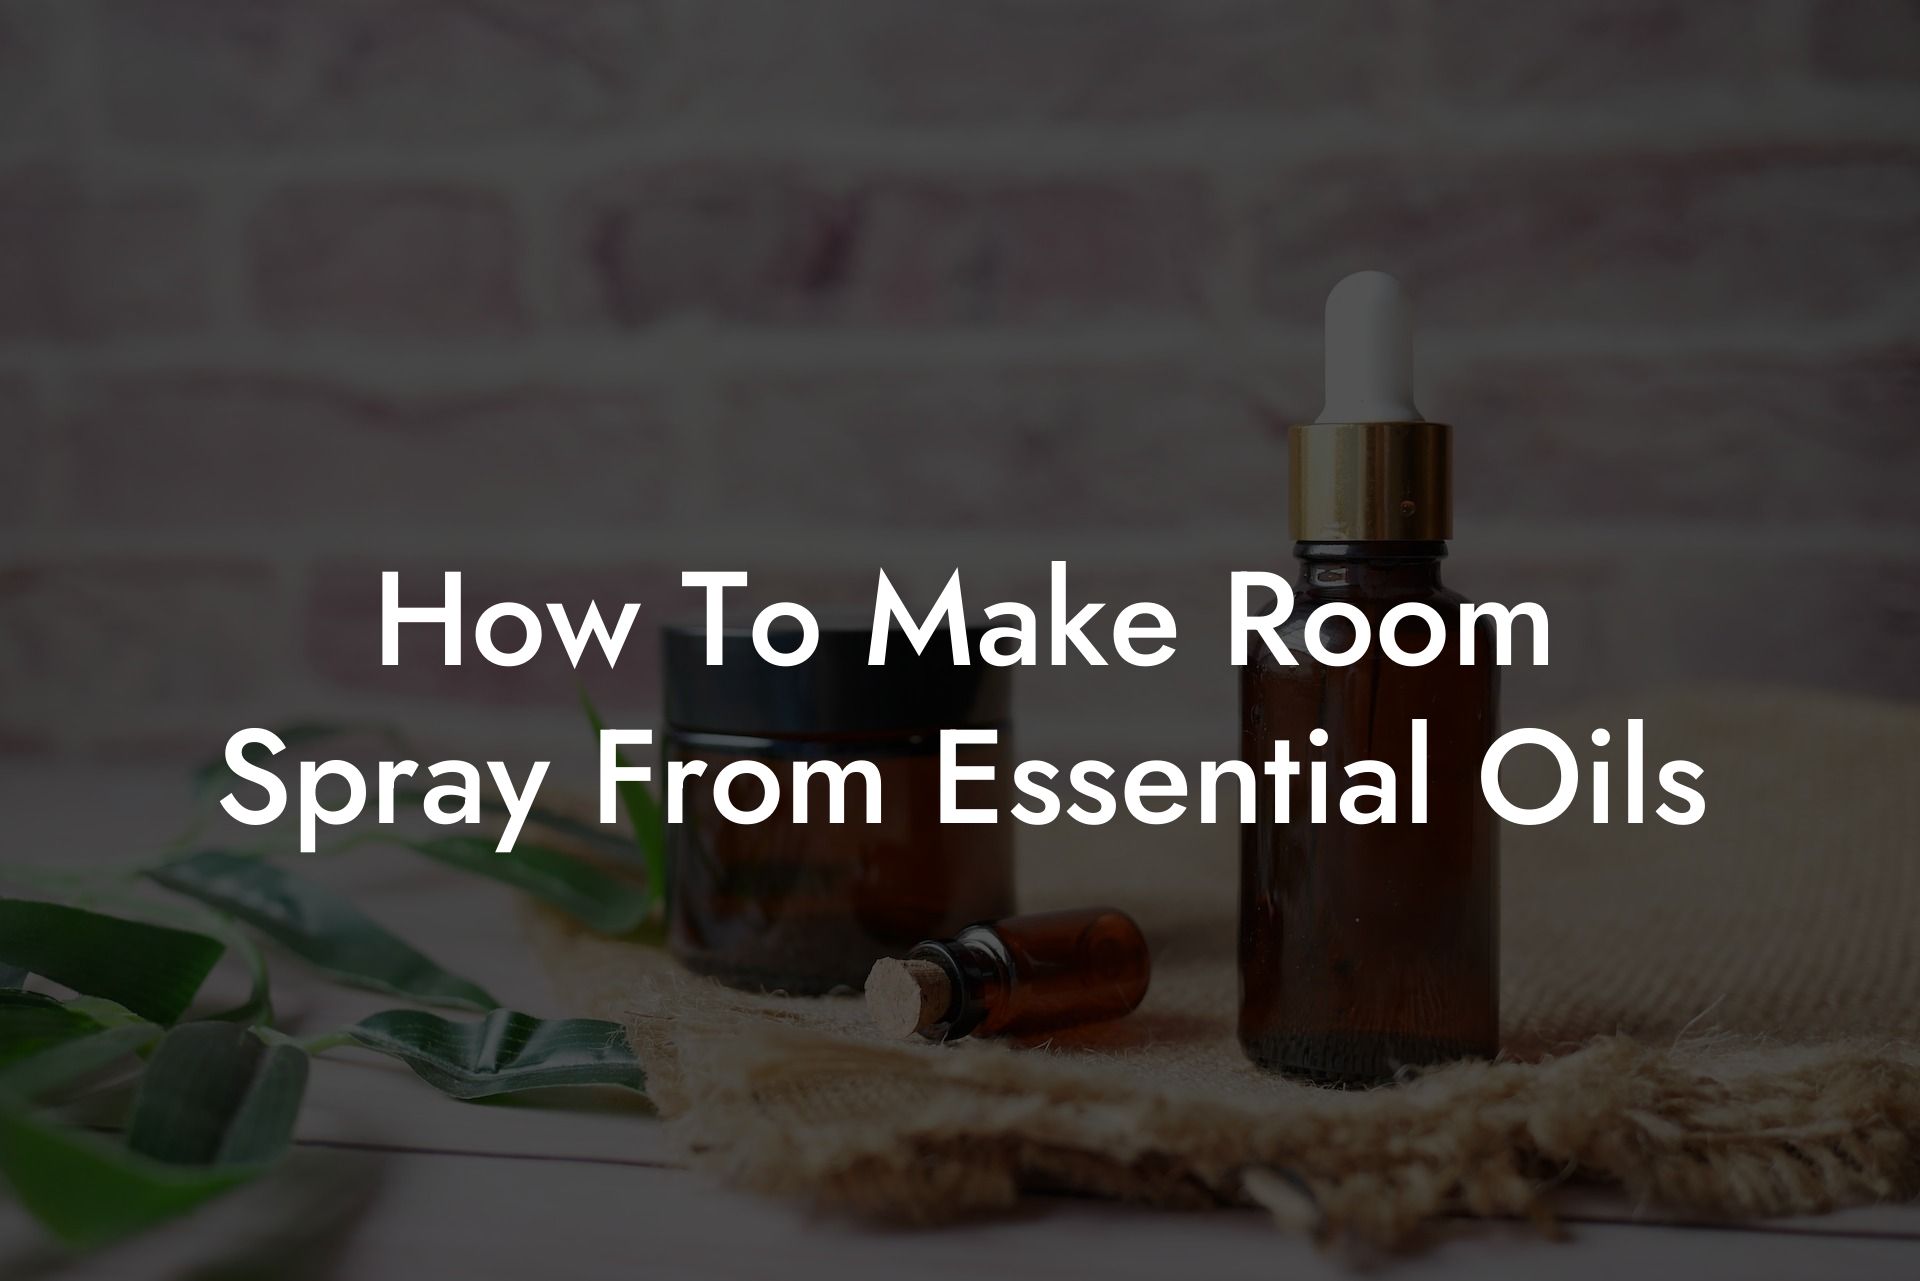 How To Make Room Spray From Essential Oils